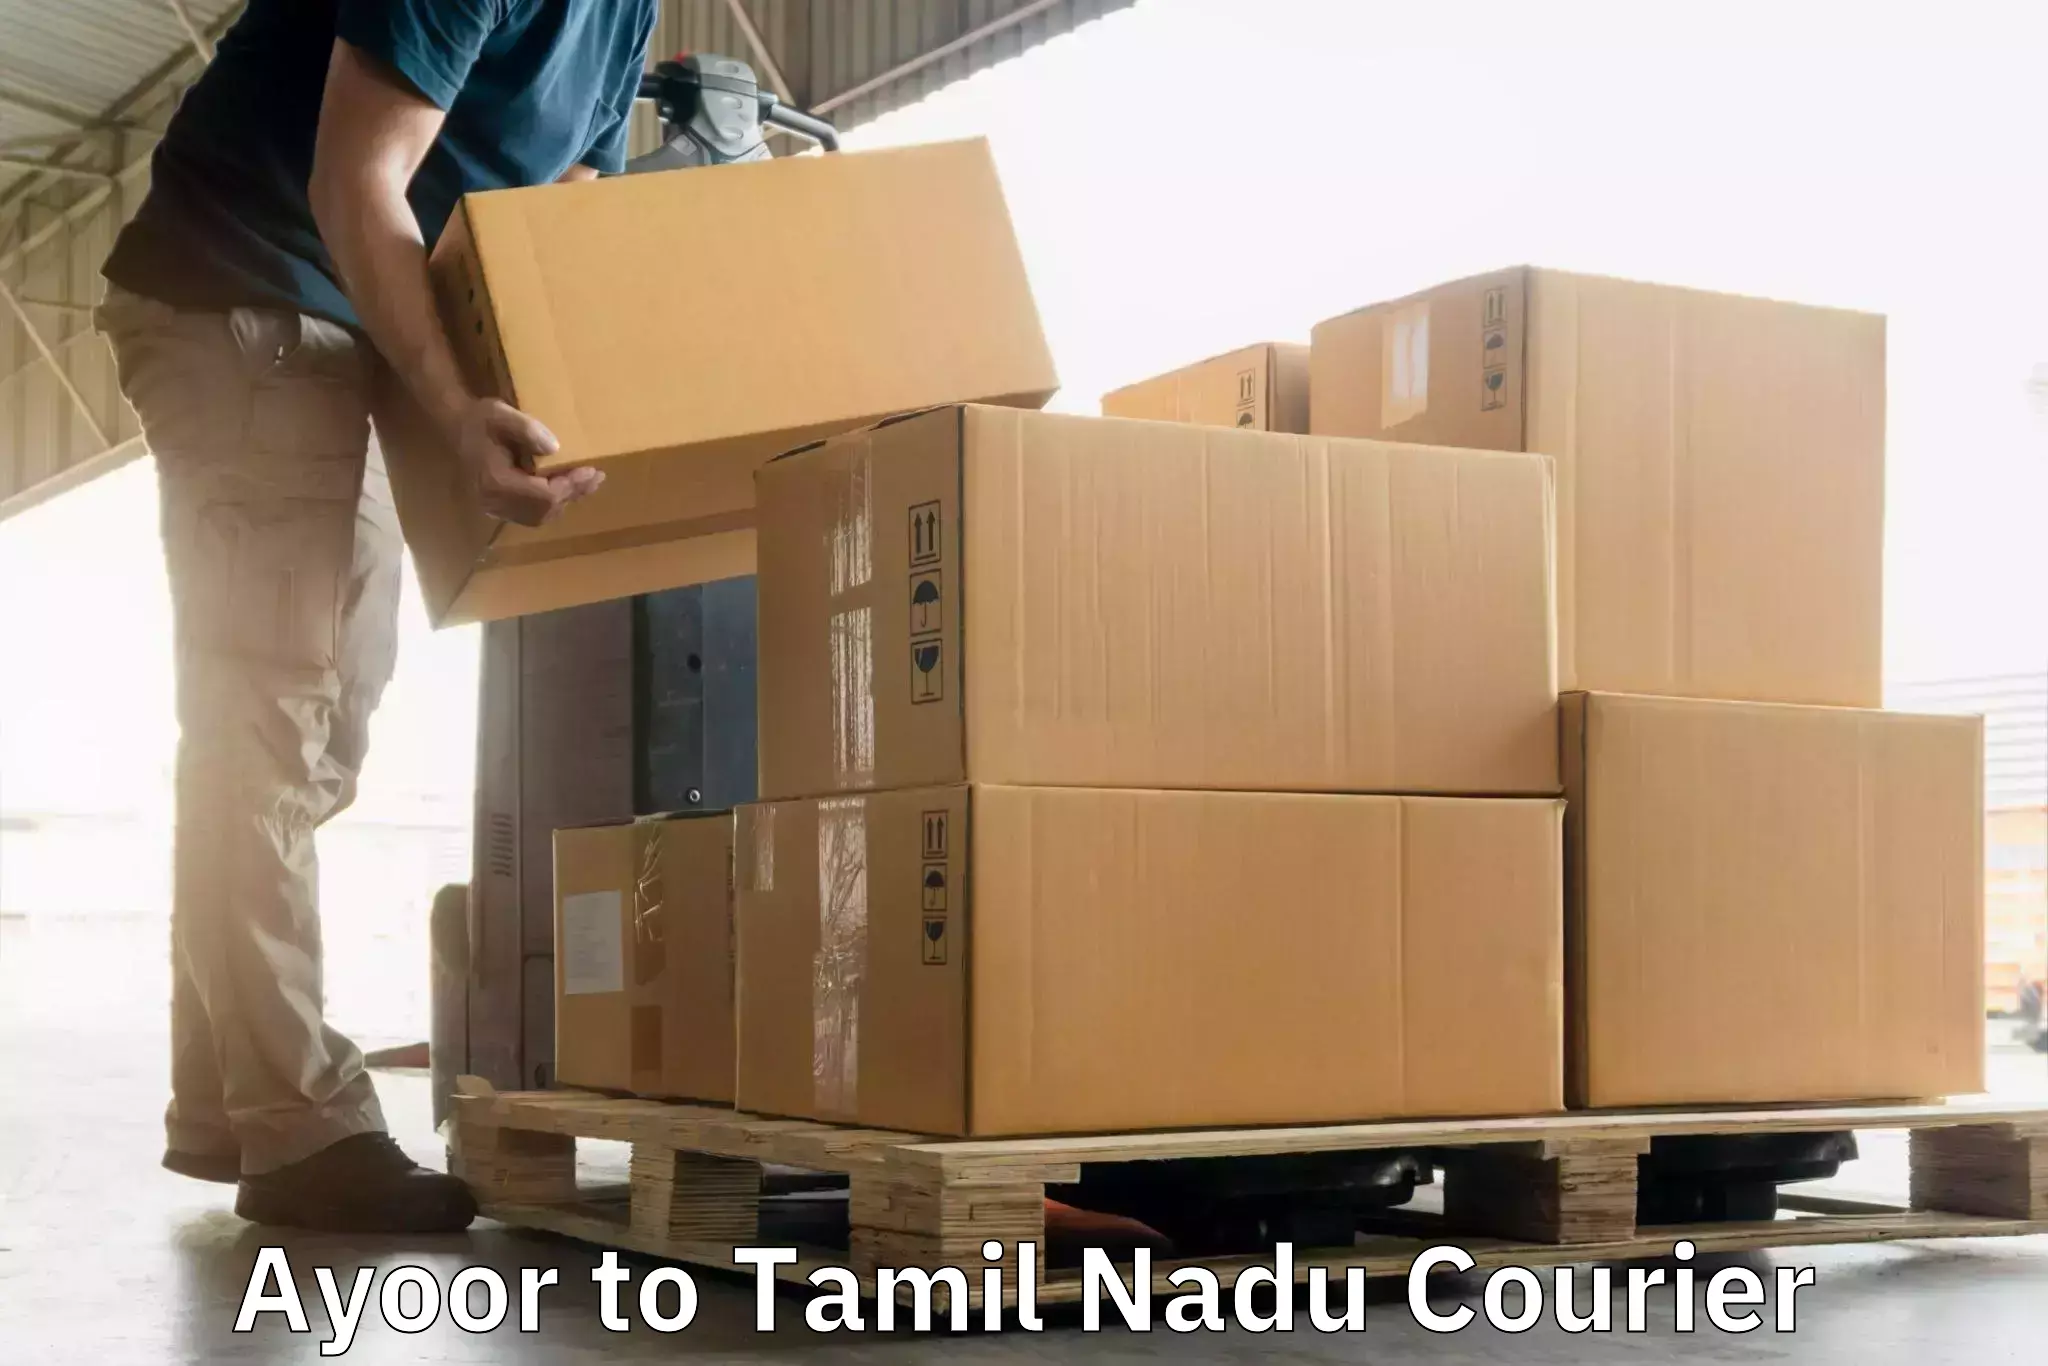 Seamless shipping experience Ayoor to Vellore Institute of Technology